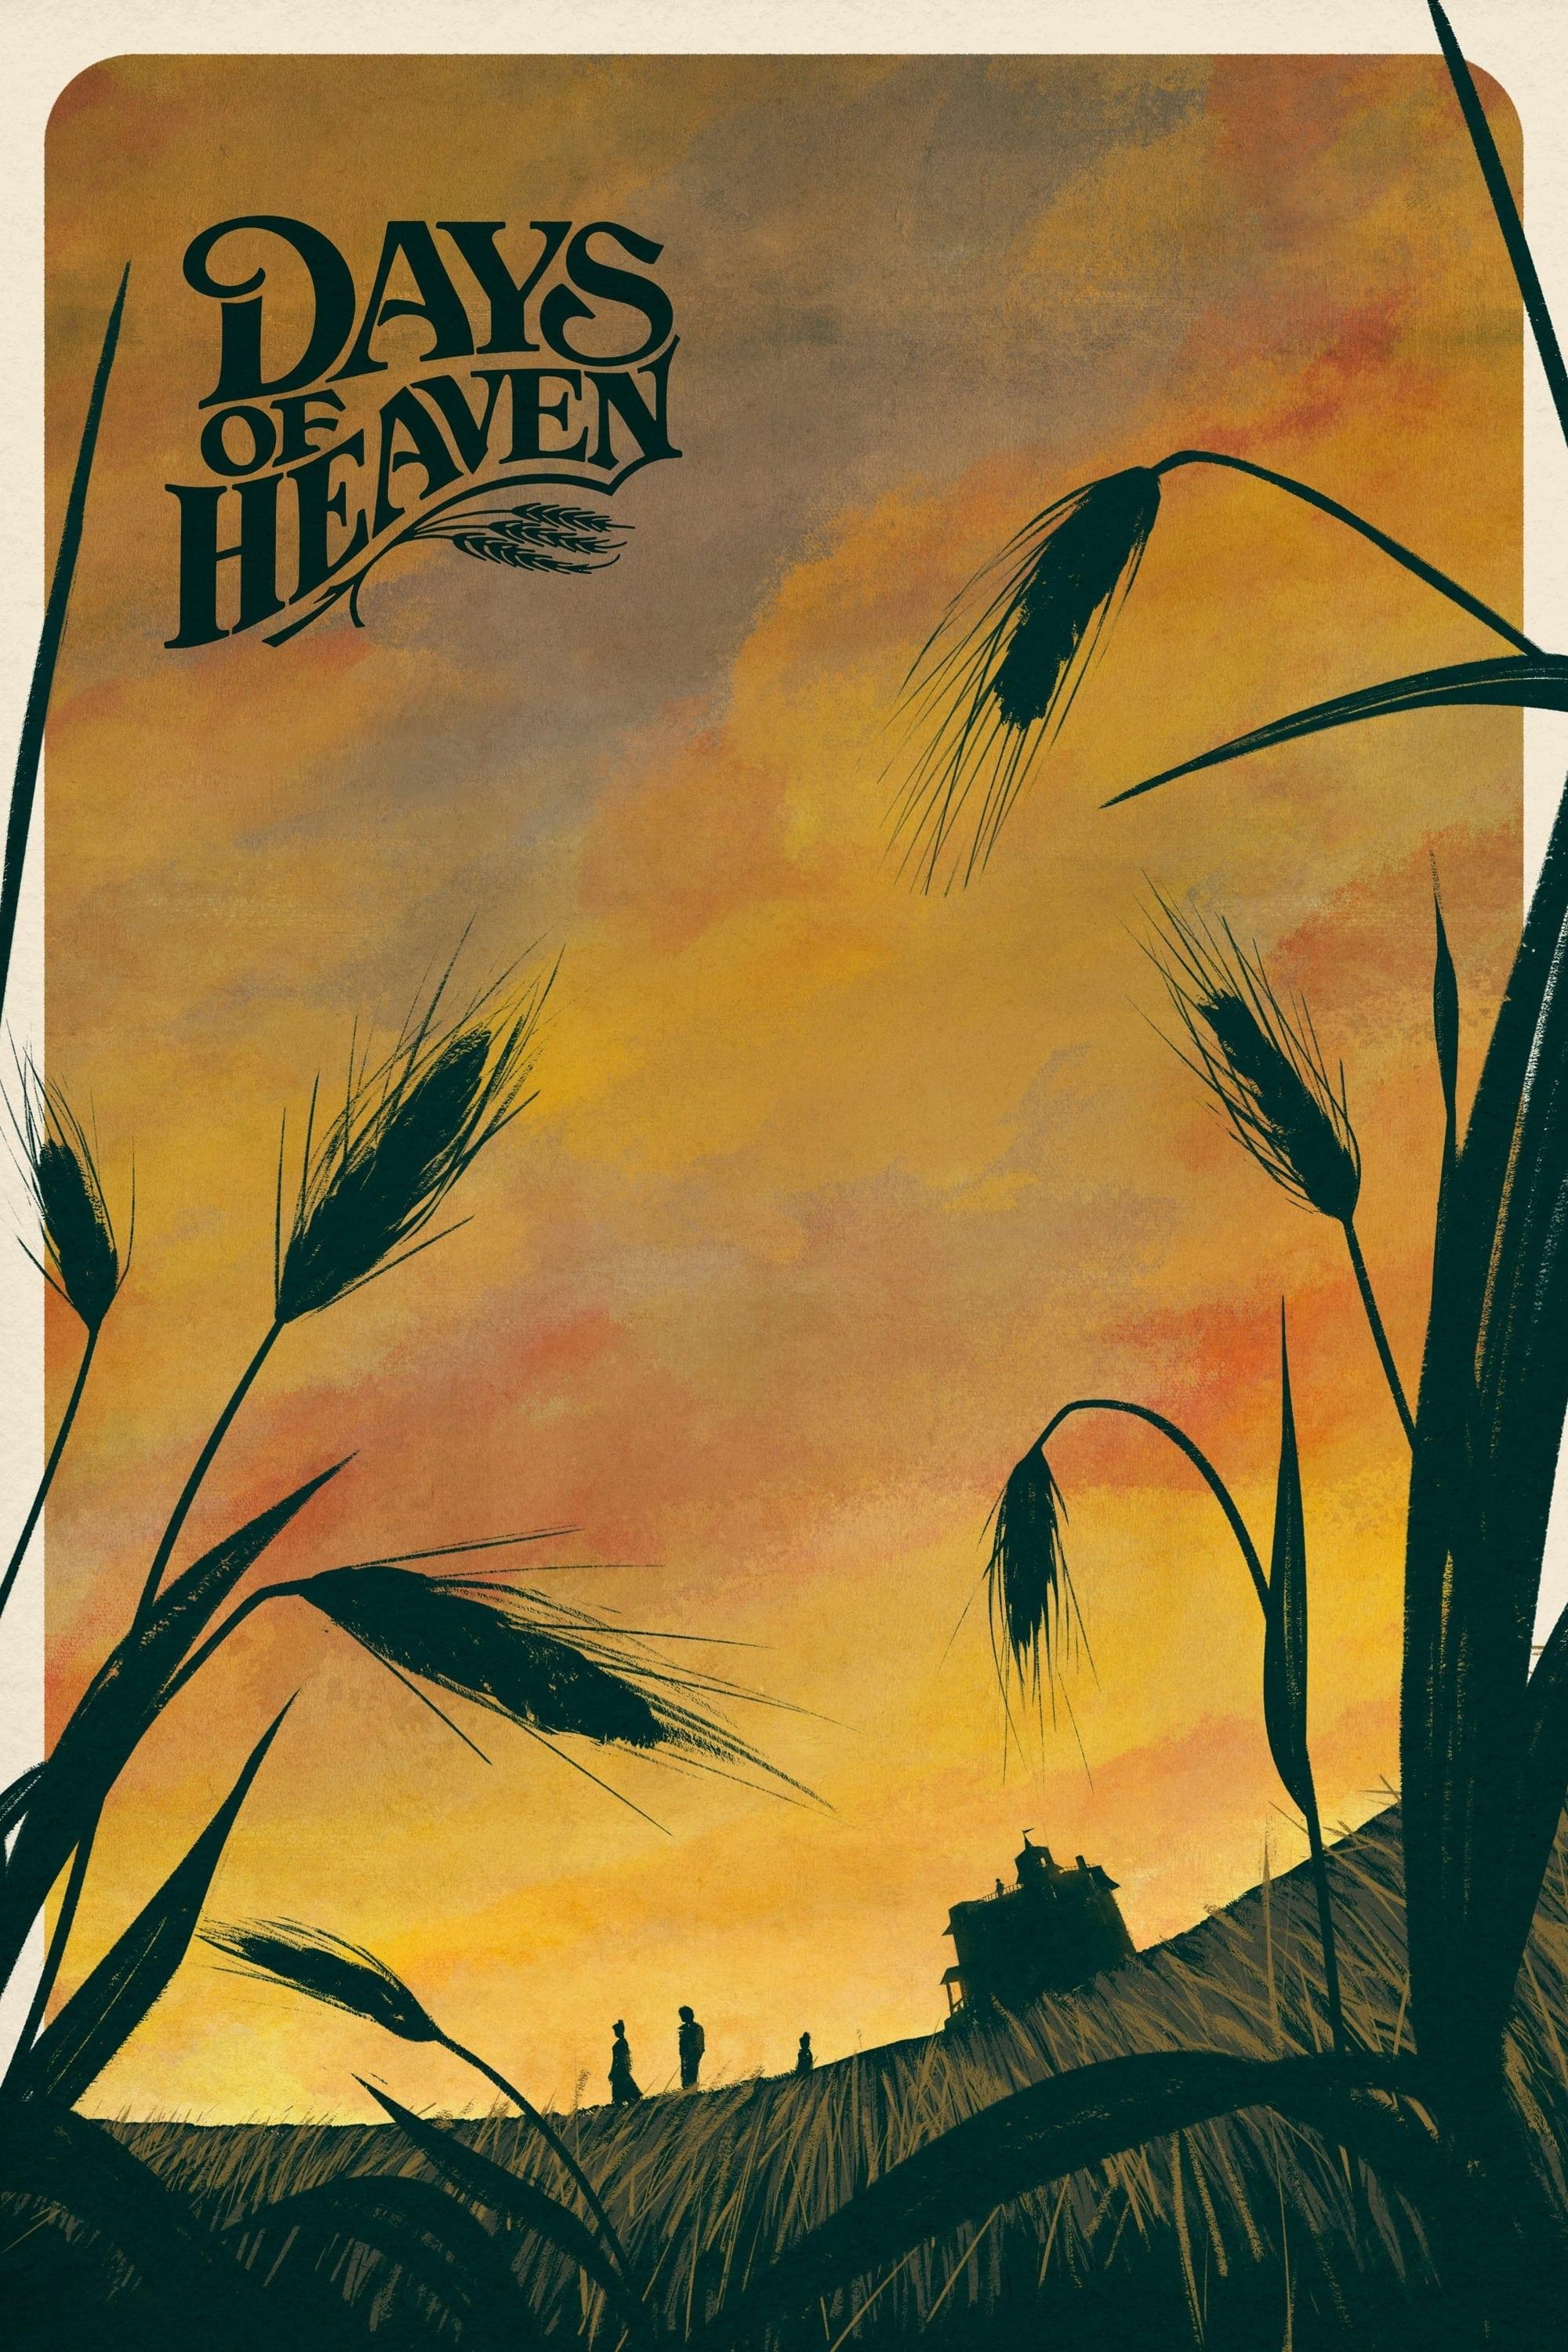 Days of Heaven poster